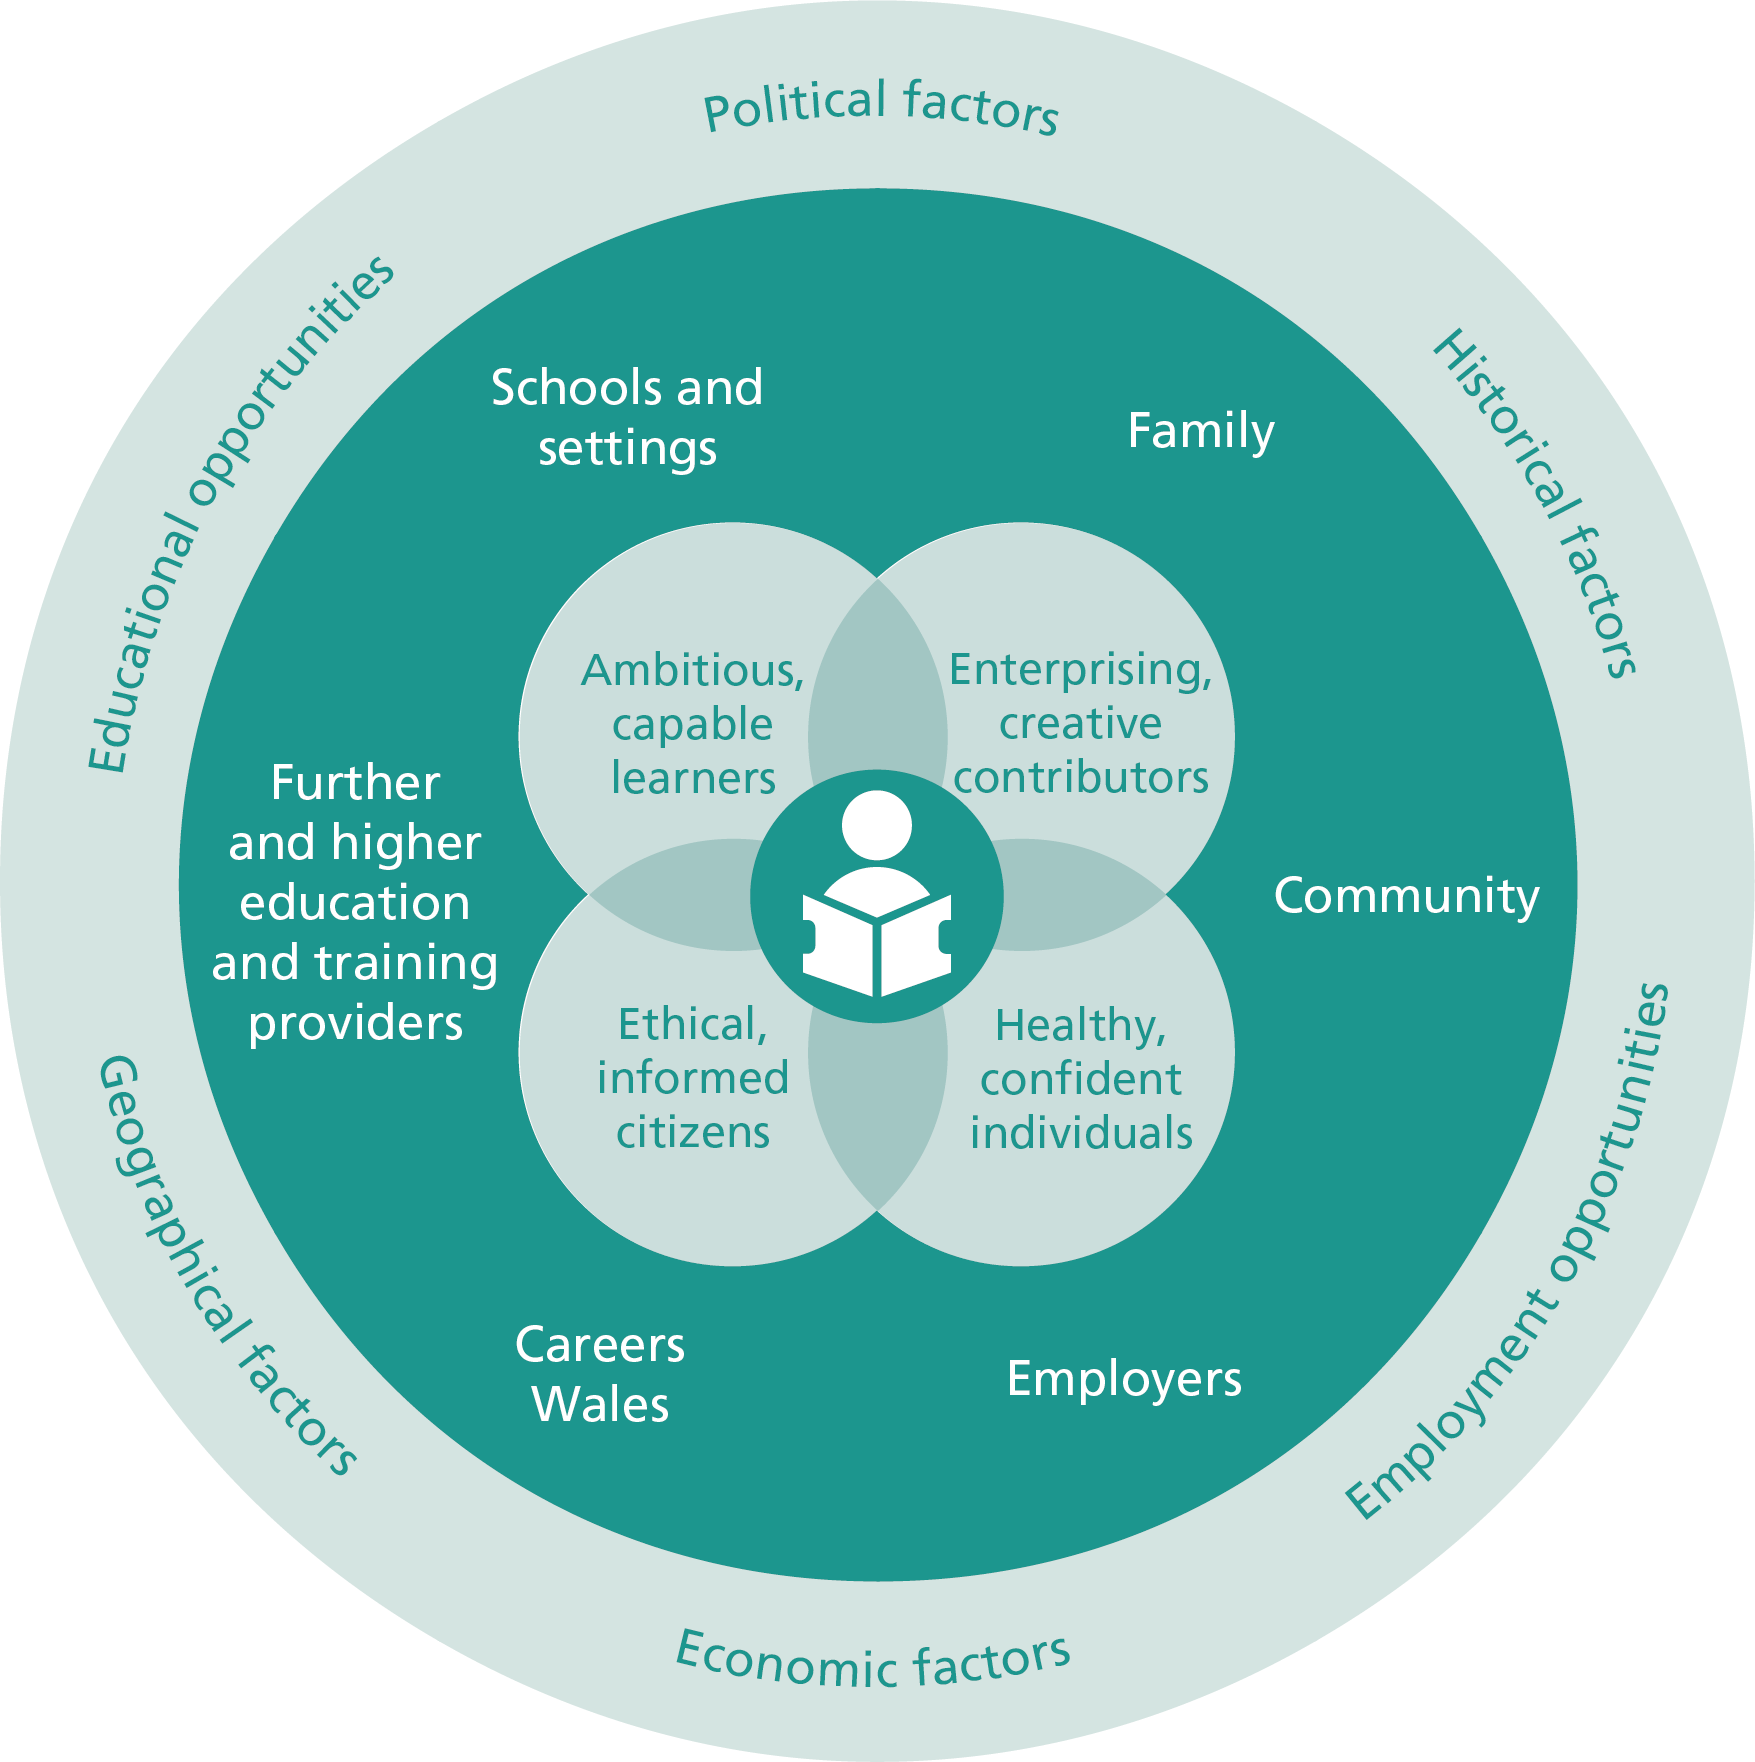 Importance of key contributors and influences on the career decisions of young people and how schools and settings should consider these in designing CWRE to support the four purposes in their curriculum.